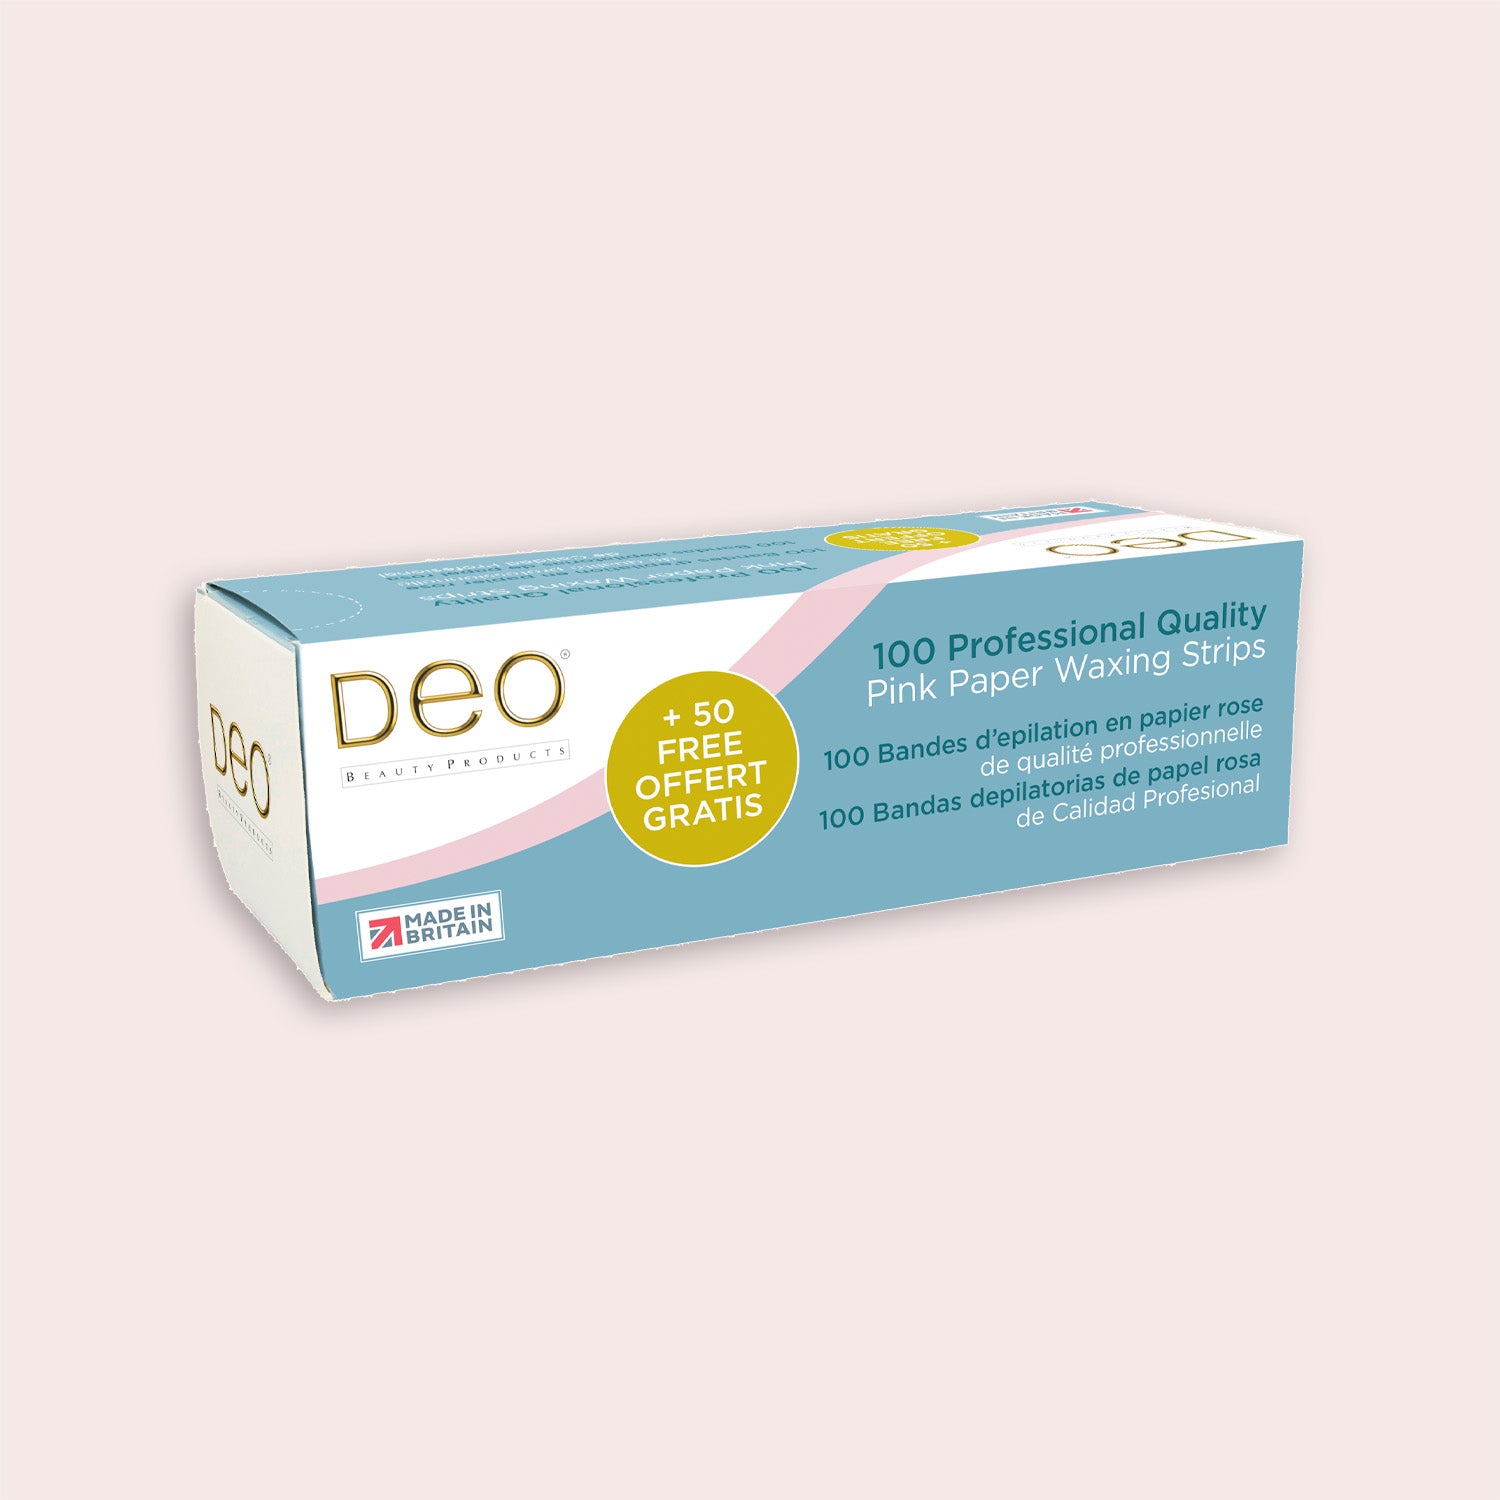 Deo Pink Paper Waxing Strips - 3.5" x 9"